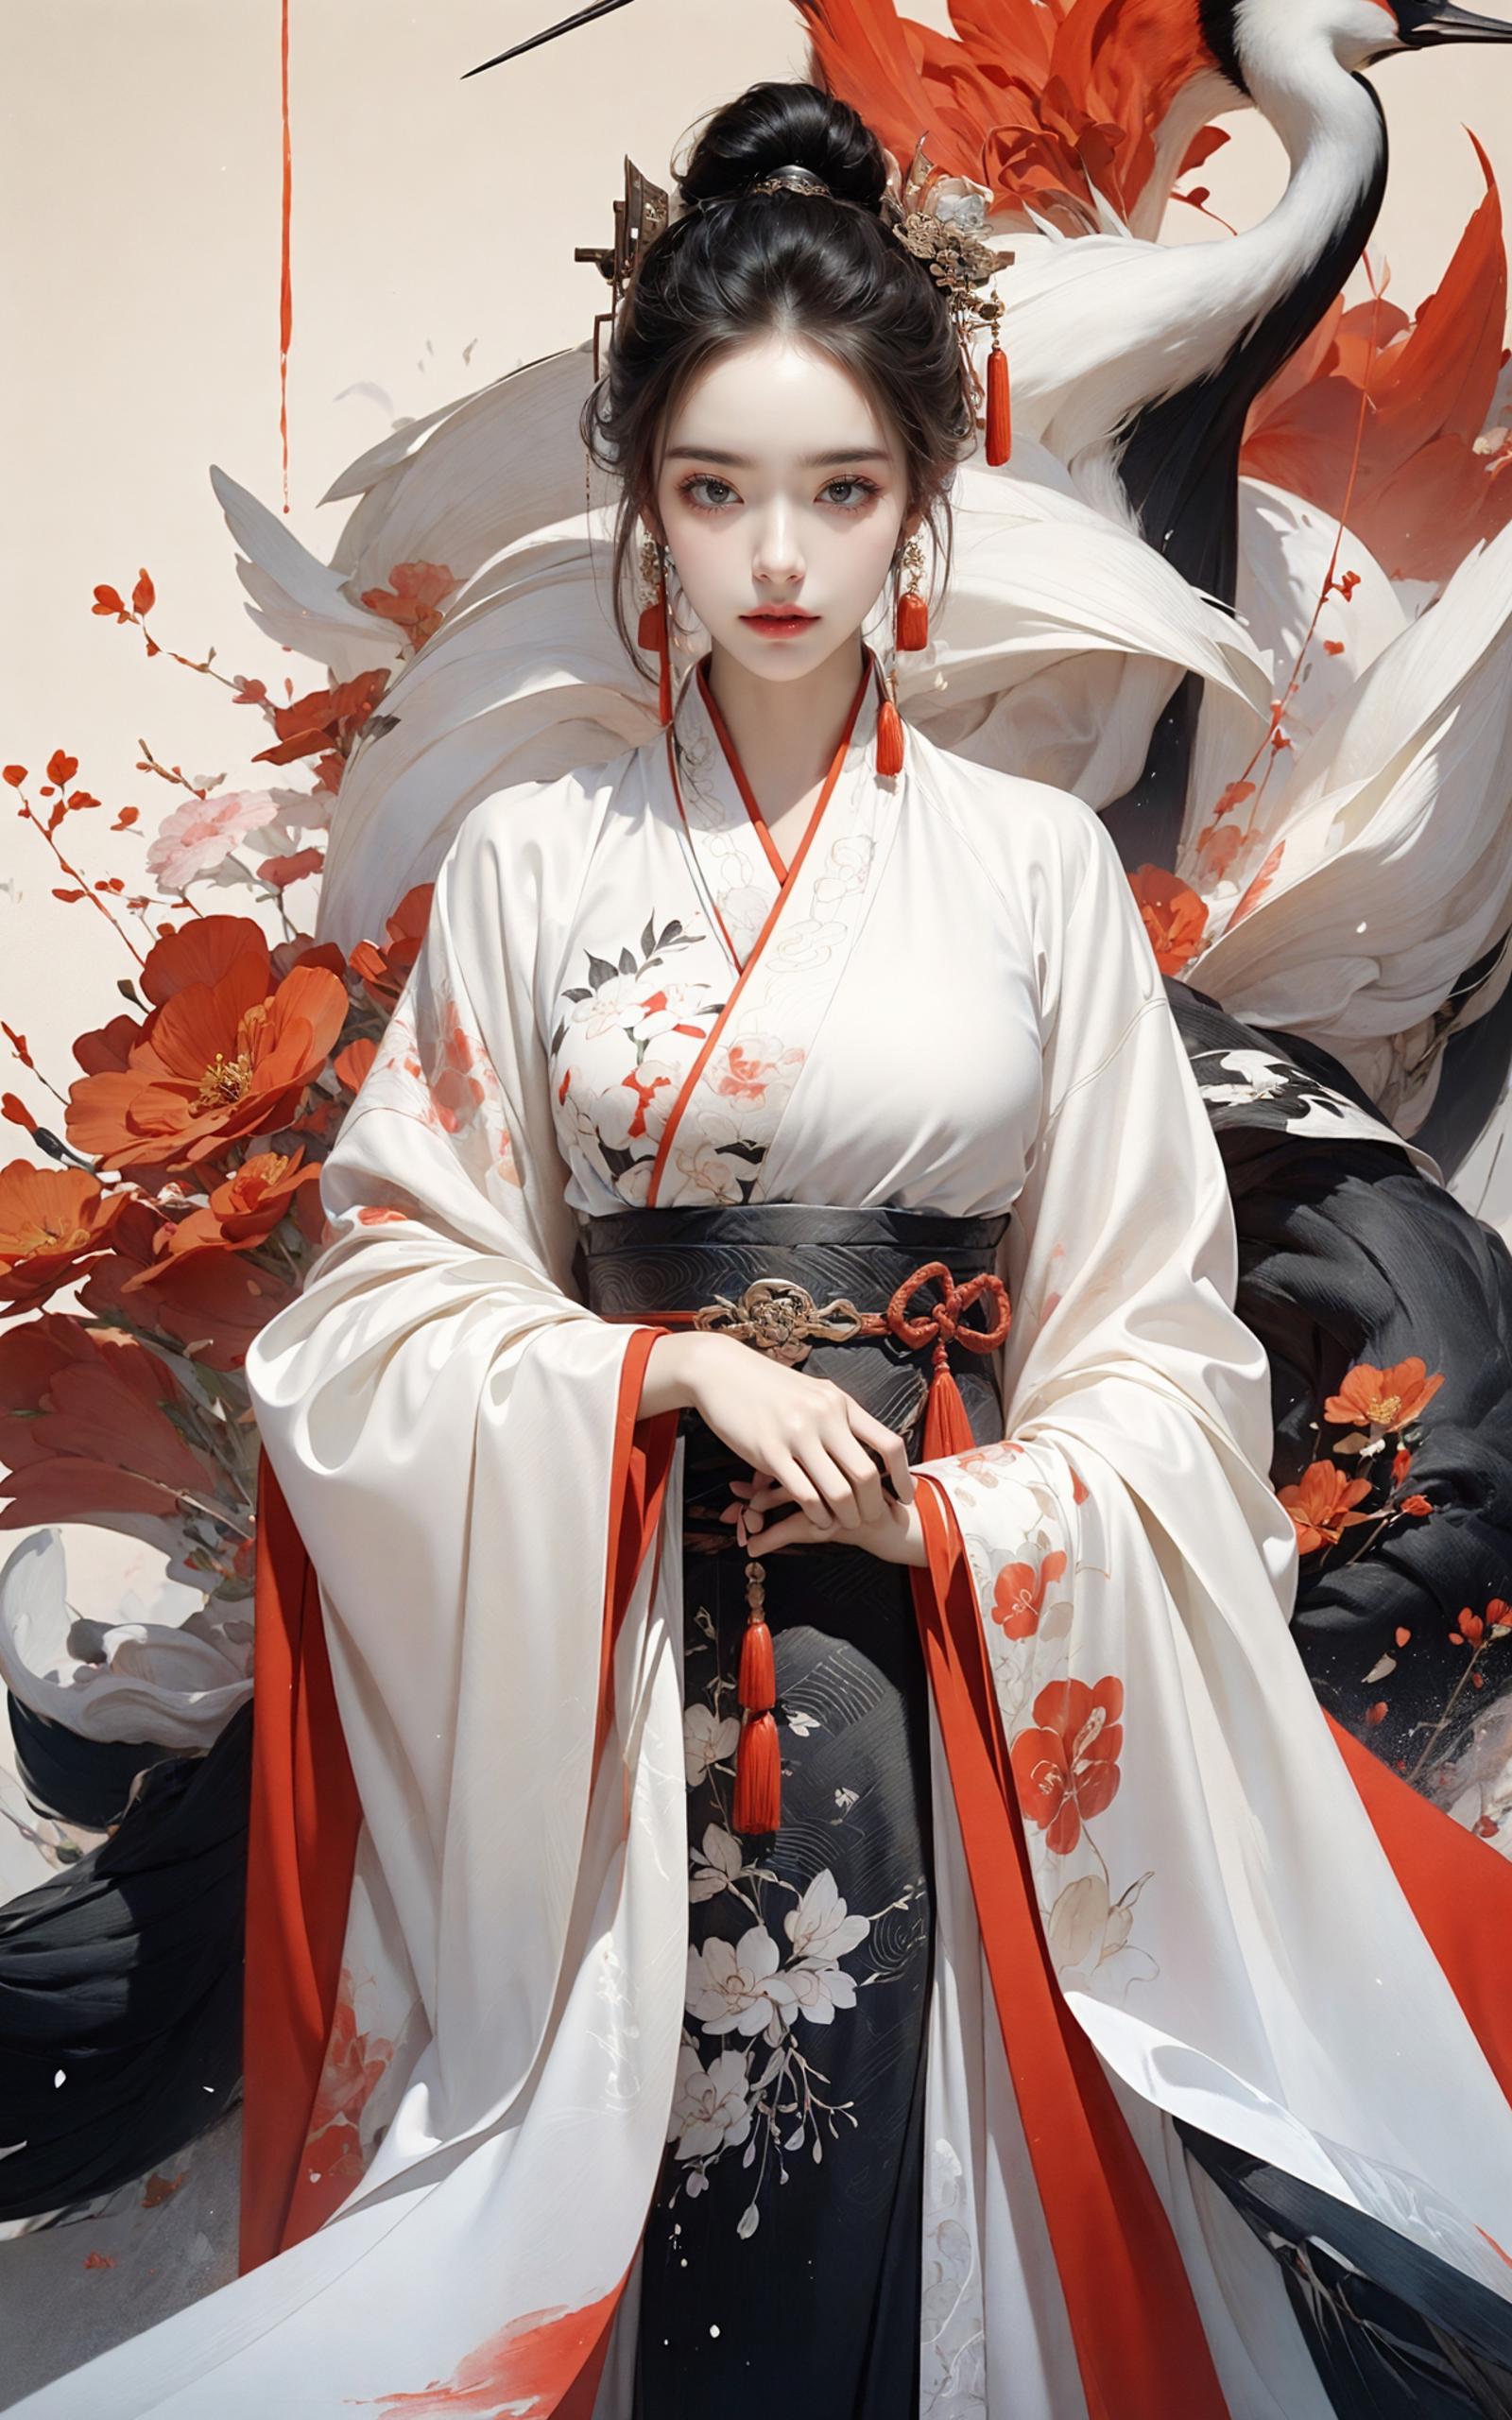 A beautiful woman in a white and red dress with a black belt.